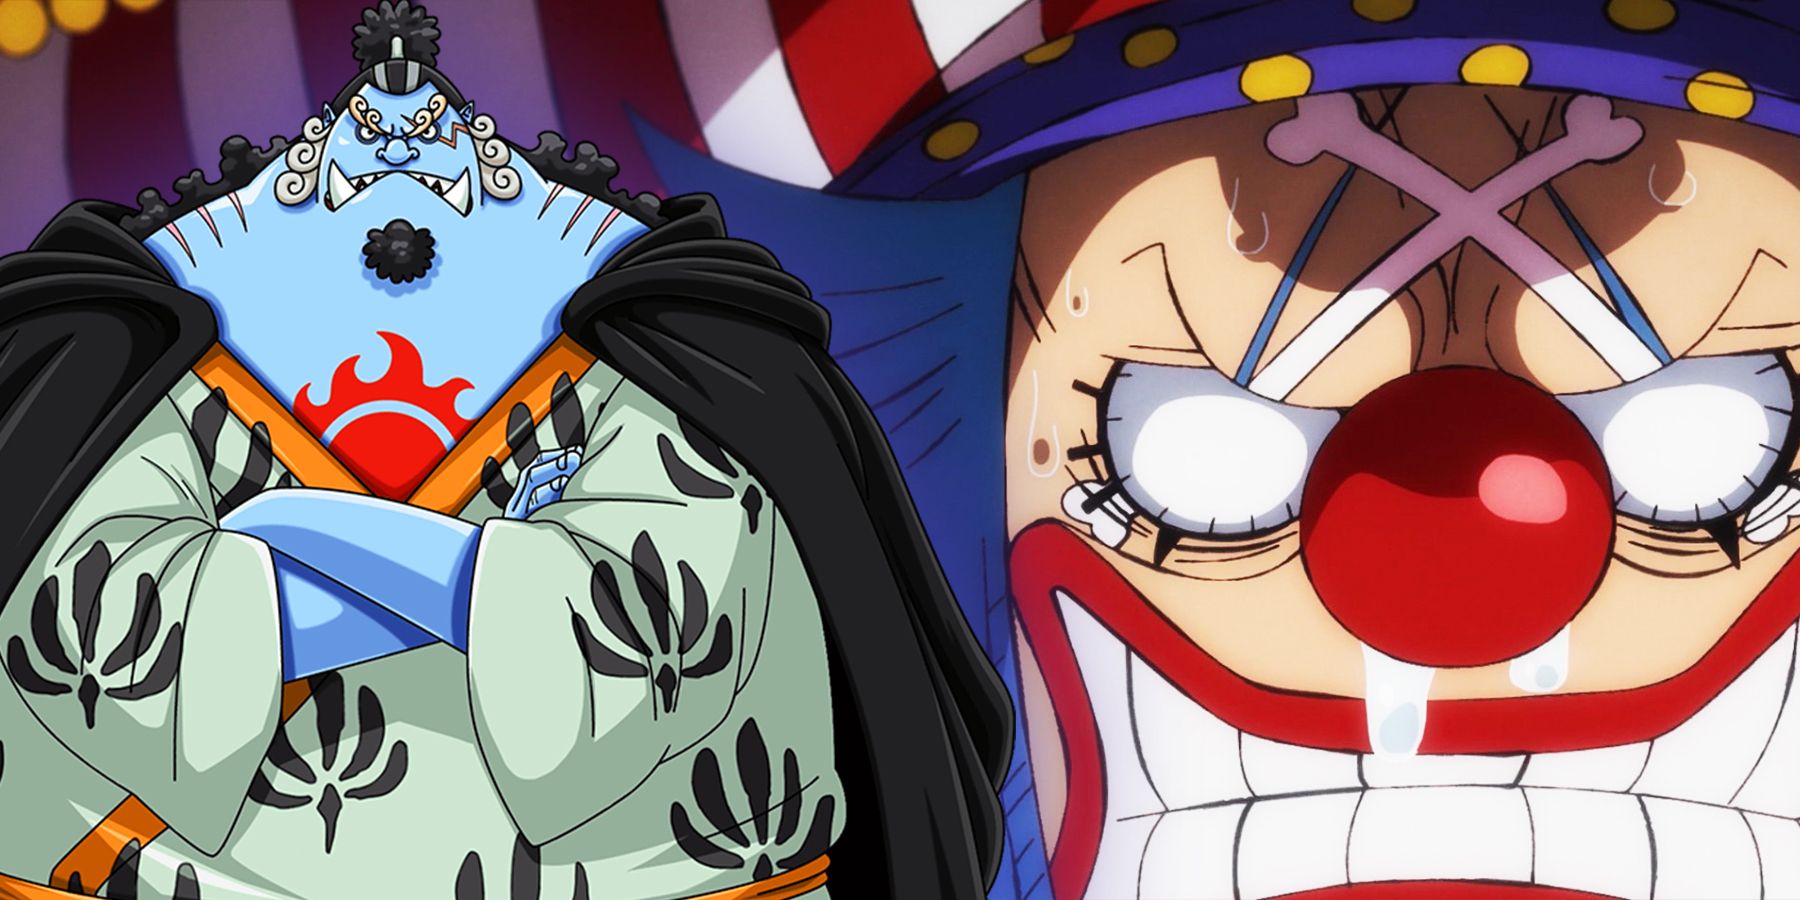 Jinbe and Buggy the Clown from One Piece